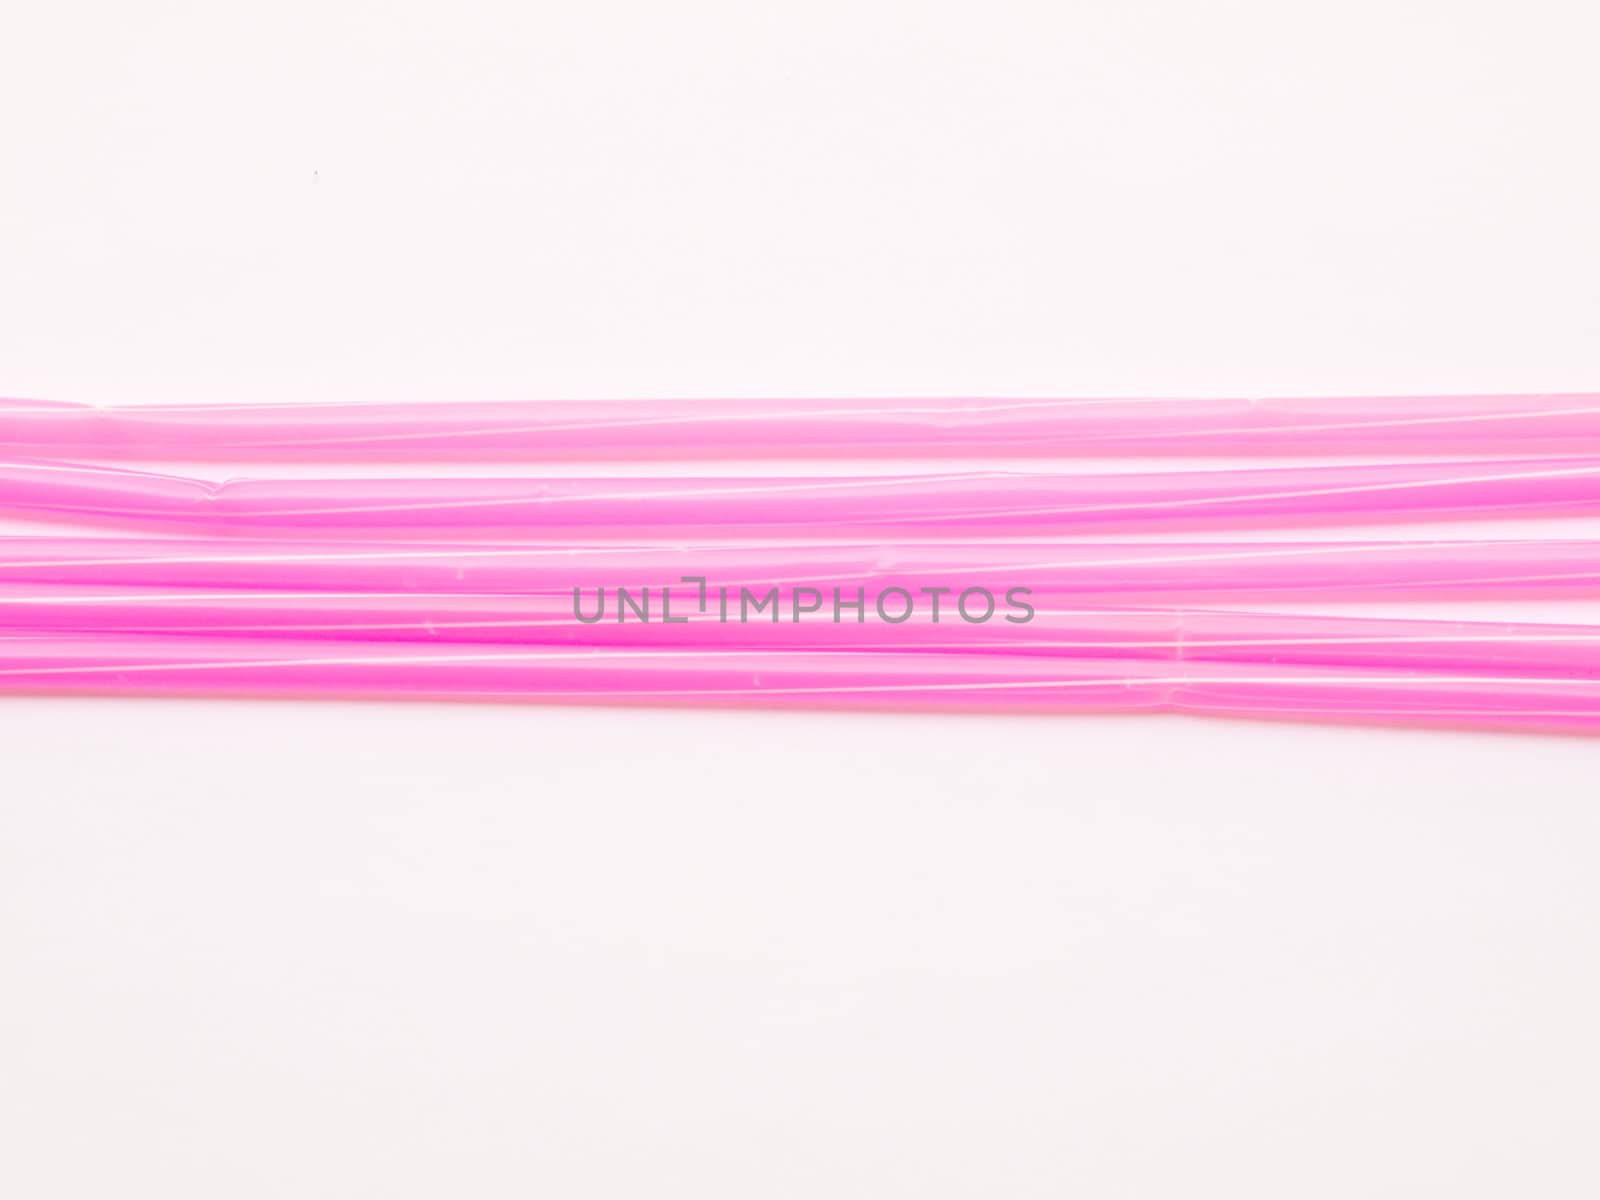 Pink straws isolated on white background